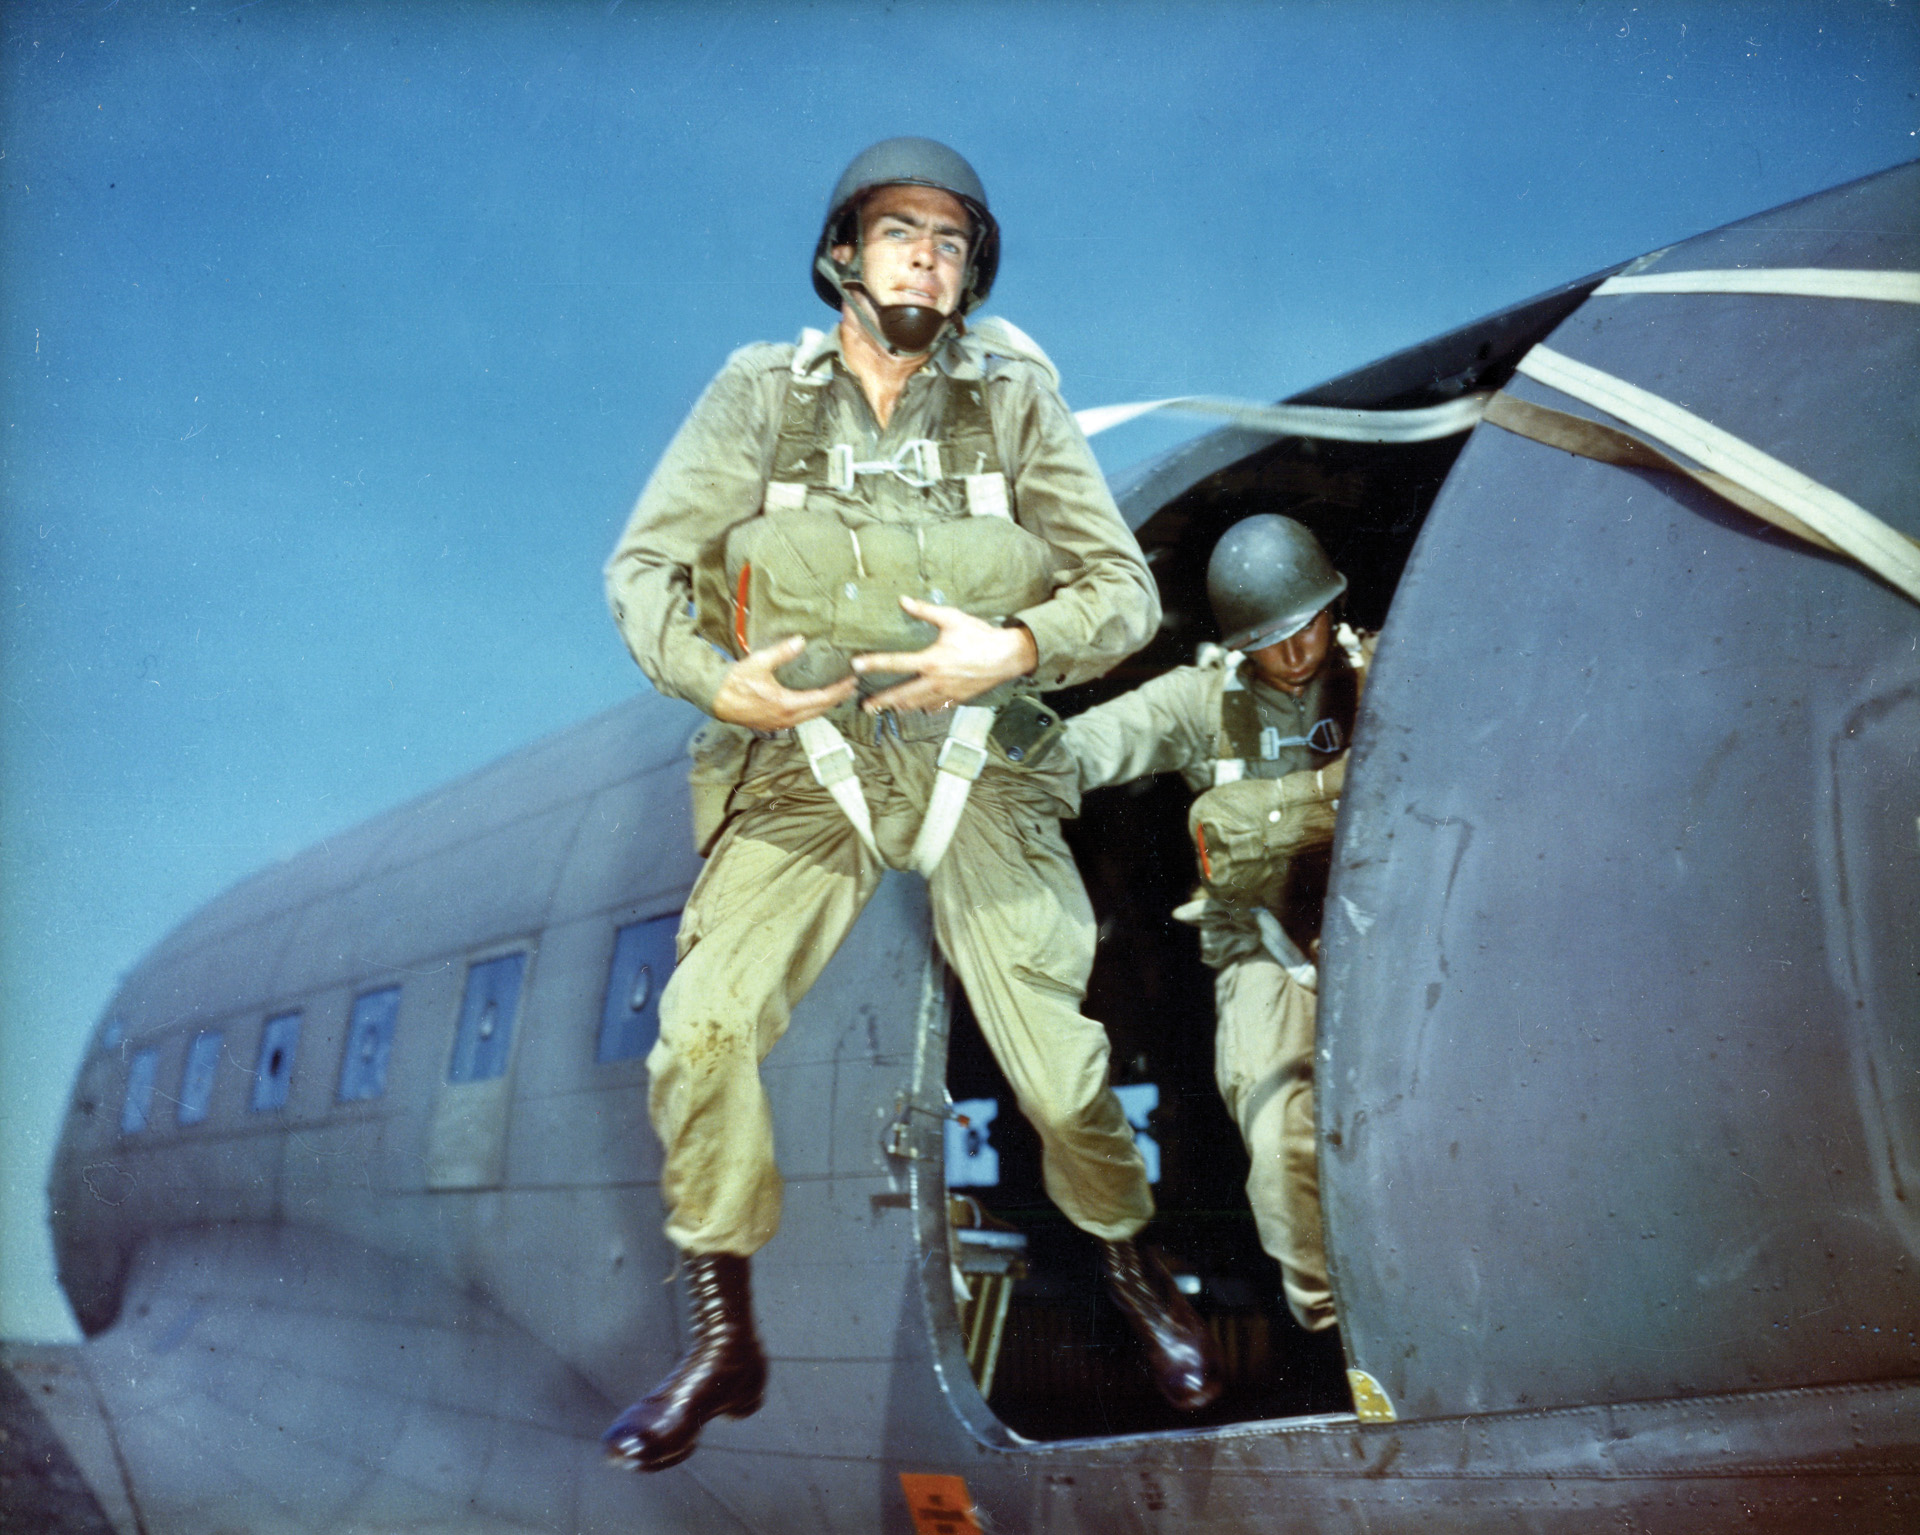 During a wartime training exercise, an American paratrooper exits a transport plane. Casualties among the airborne troops were expected to be high on D-Day, but despite difficulties turned out to be acceptable.